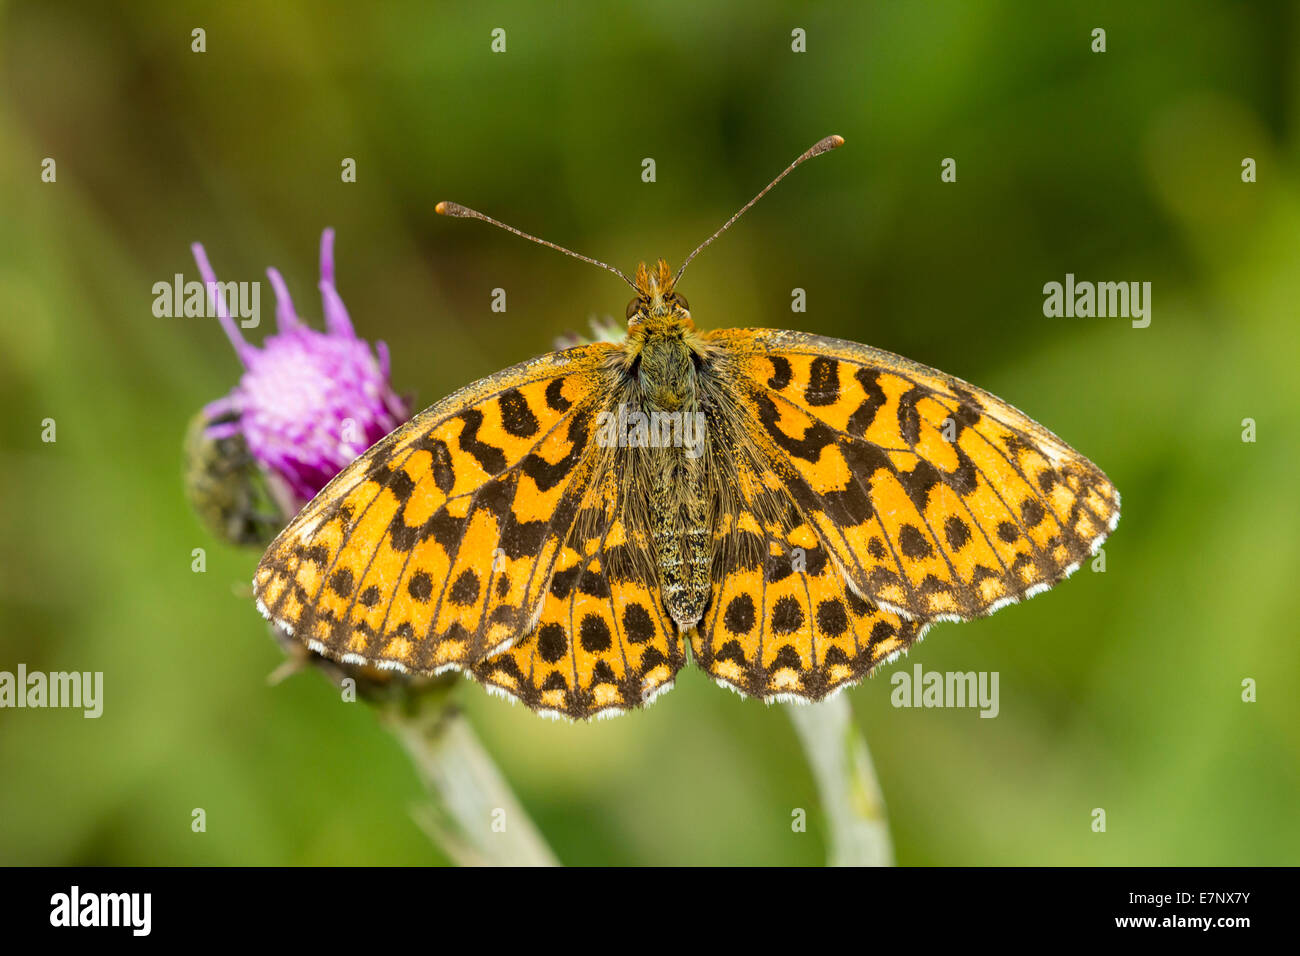 Animal, Insect, Butterfly, Lepidoptera, Boloria dia, Weaver's Fritillary, Violet Fritillary, Nymphalidae, Switzerland Stock Photo